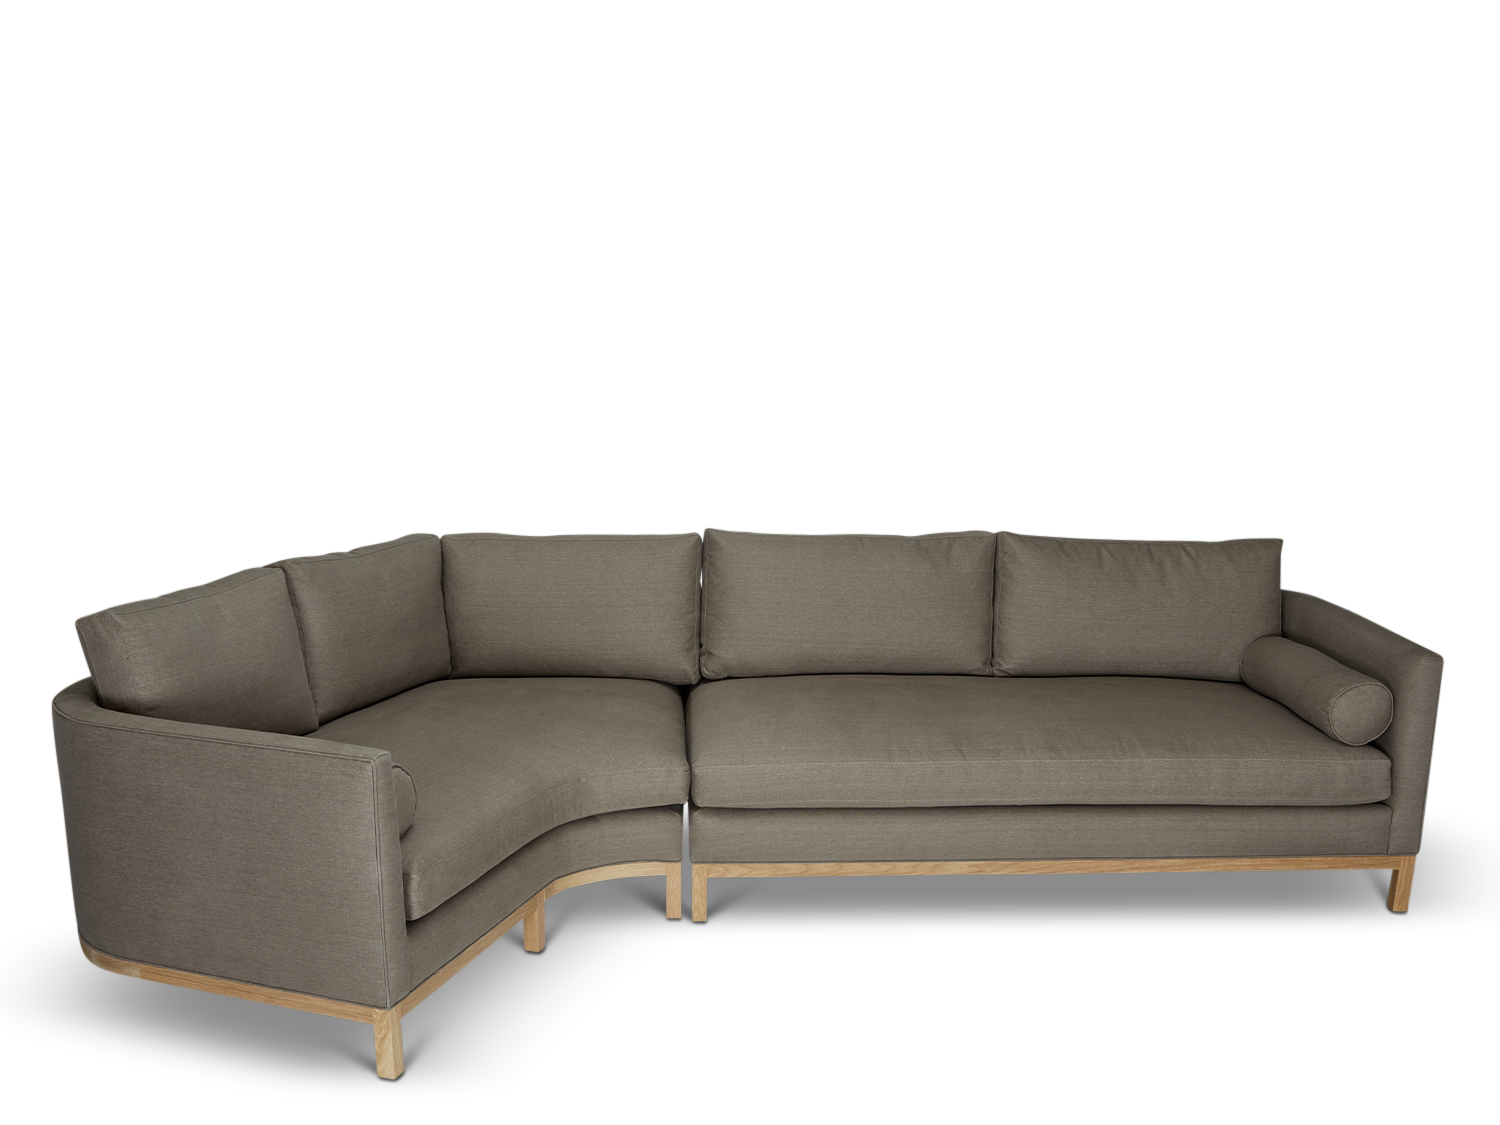 Curved Back Sectional - Contract Grade